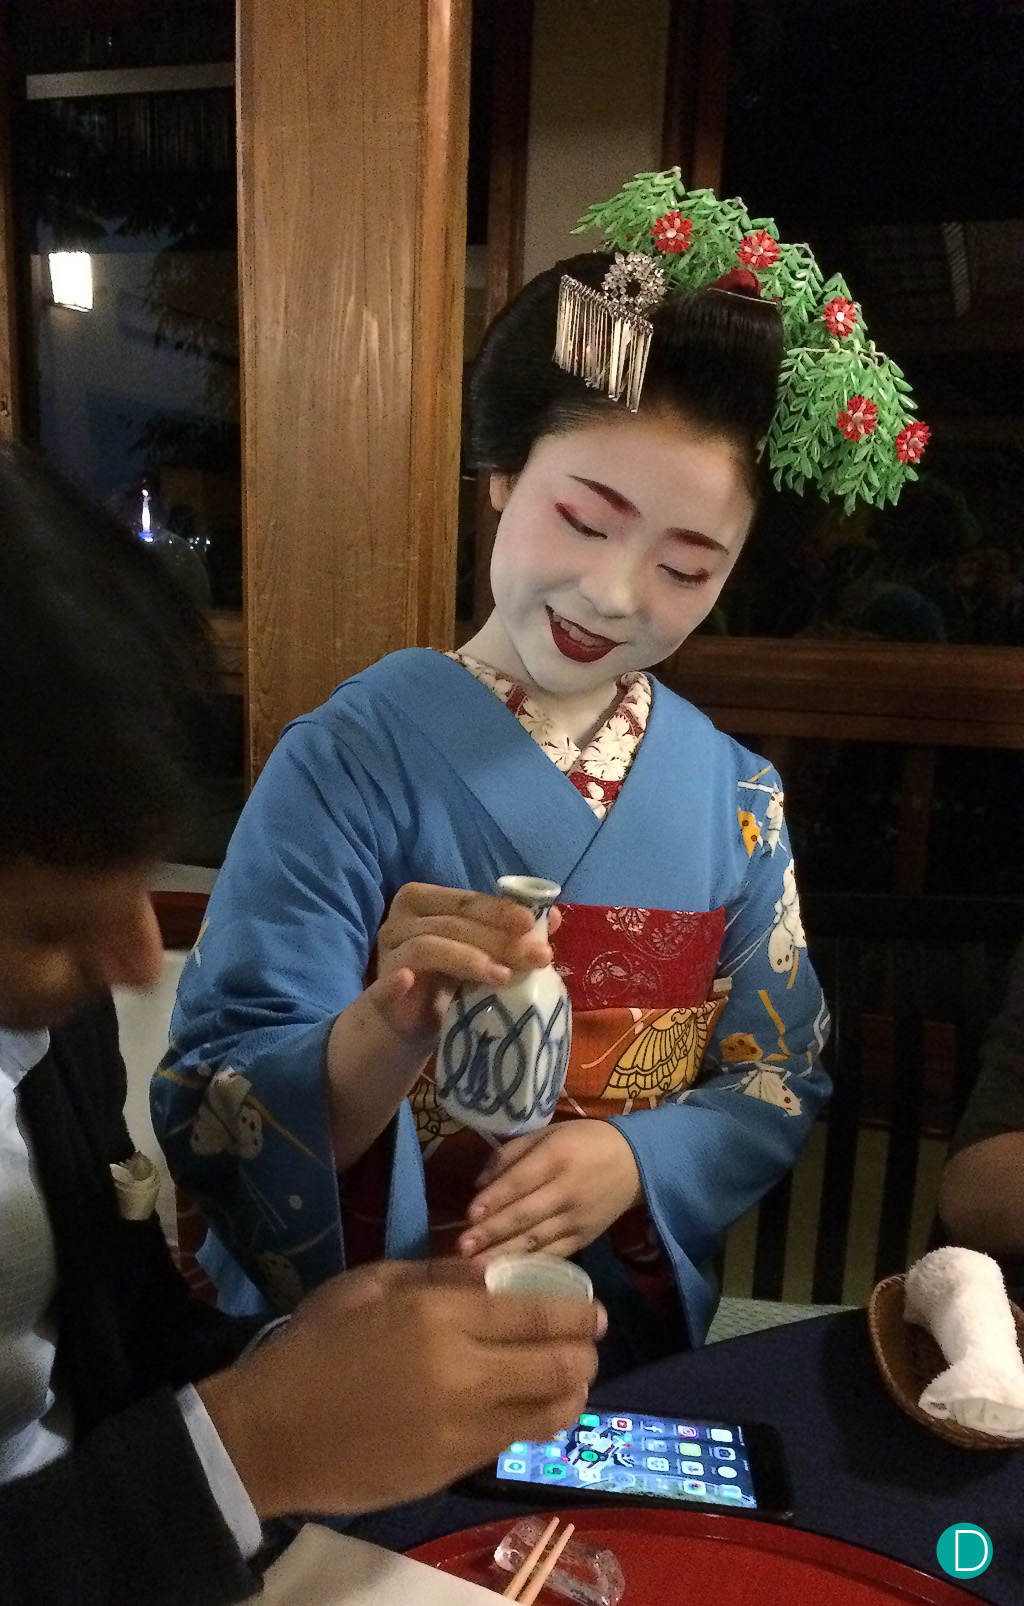 Tradition dictates that one never pours one's own alcohol. And when a Maiko is in attendance, she does the needful.